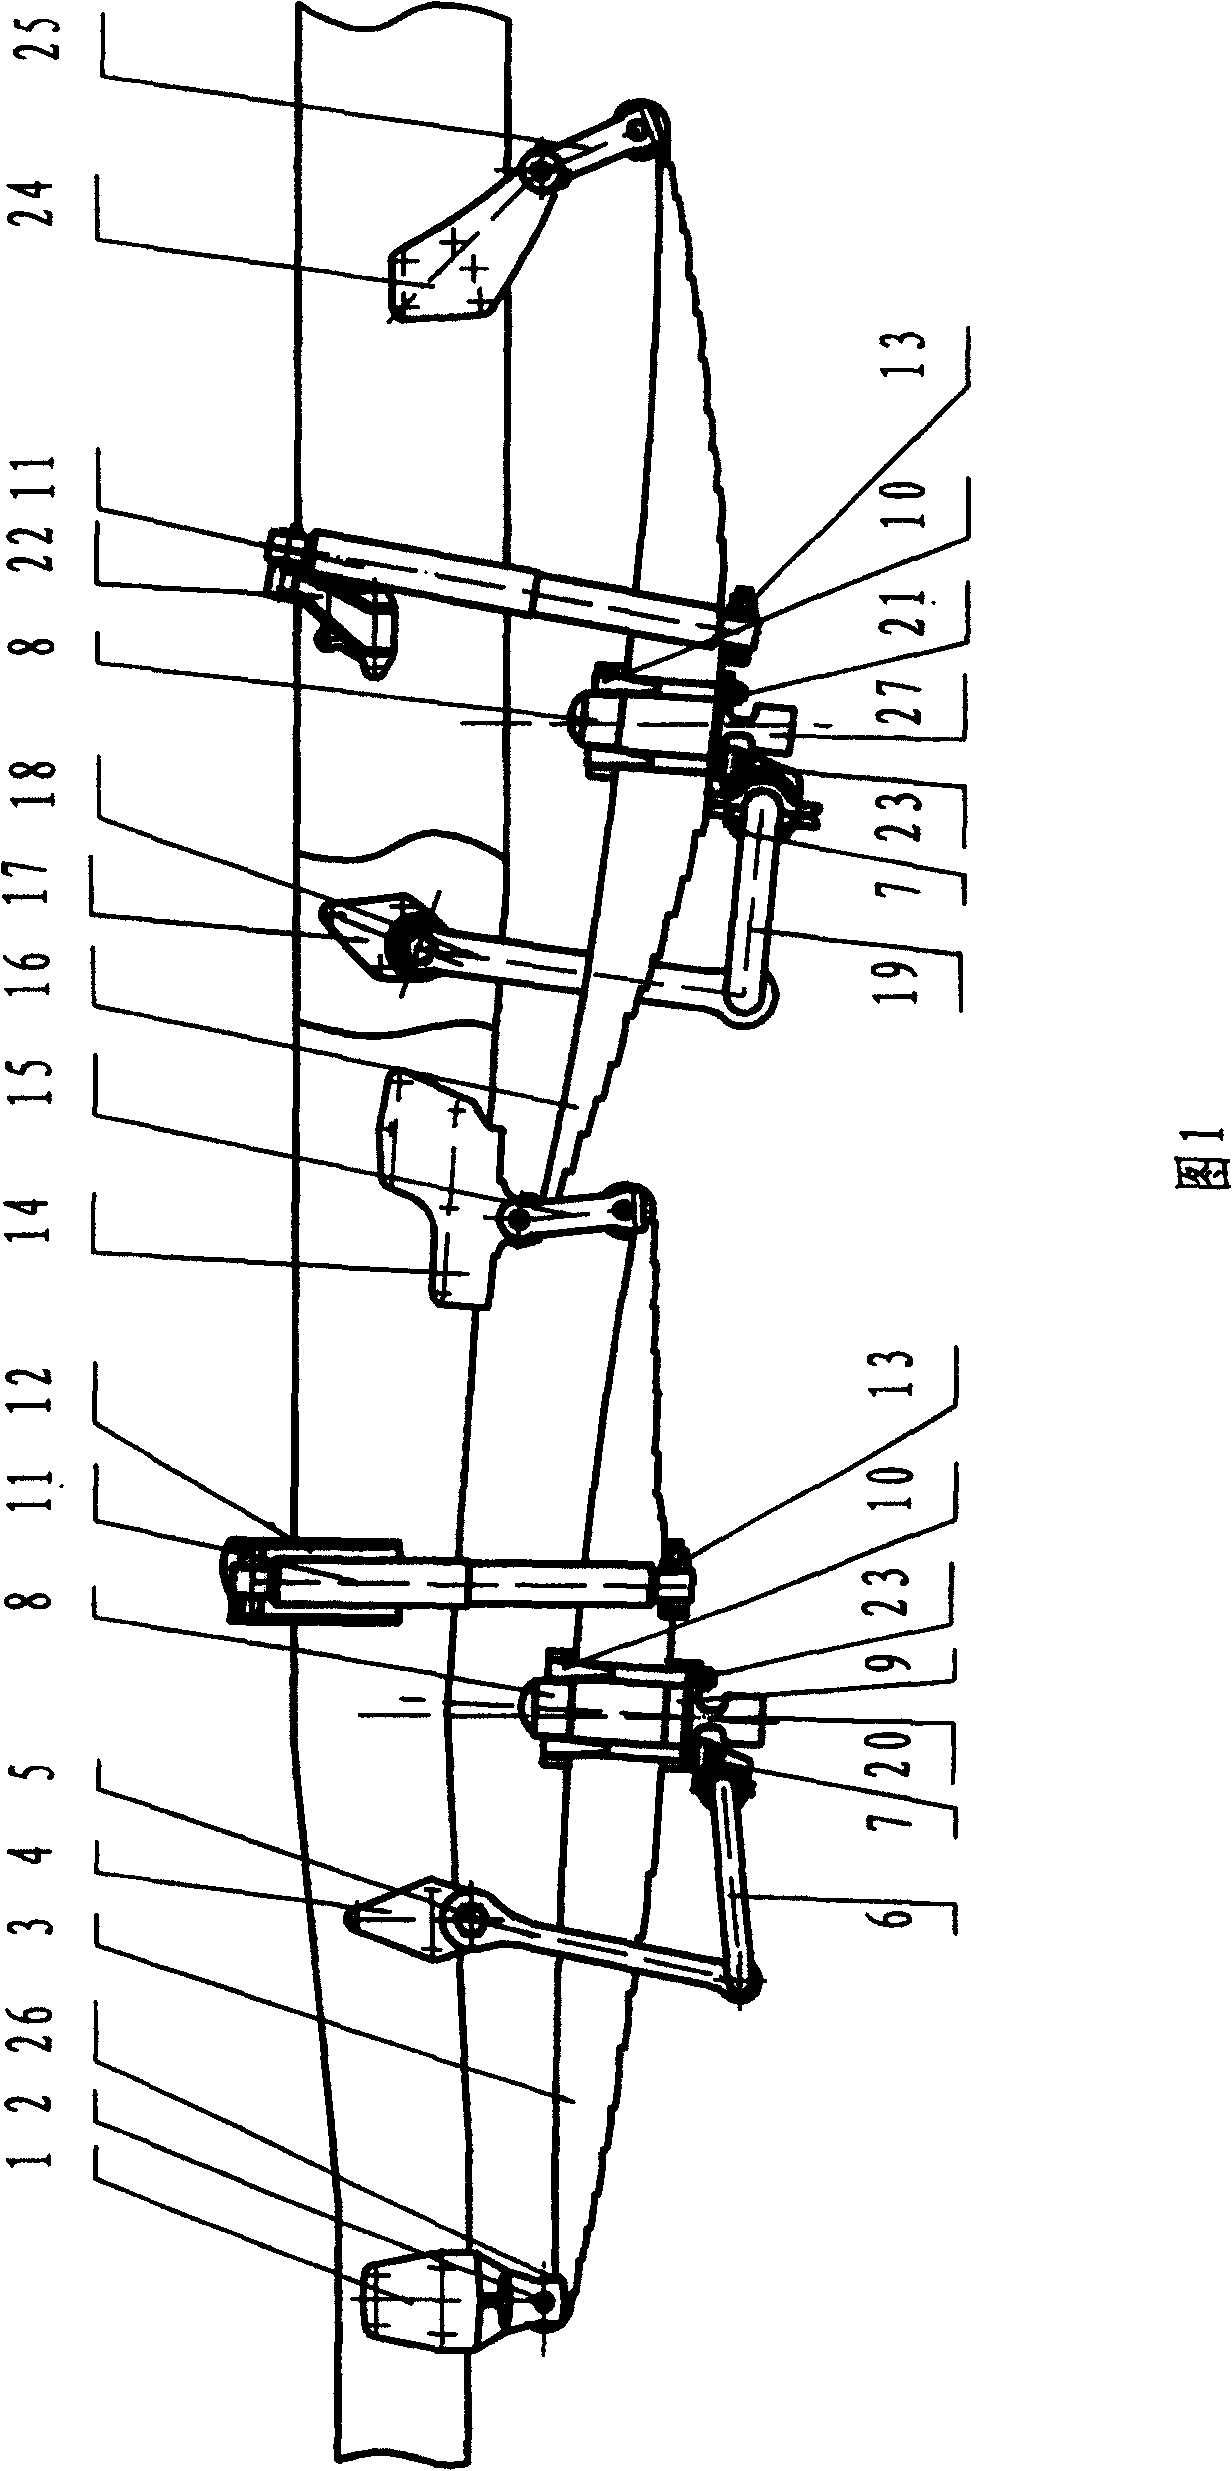 Six-point supporting type hanging apparatus for vehicle double front axle